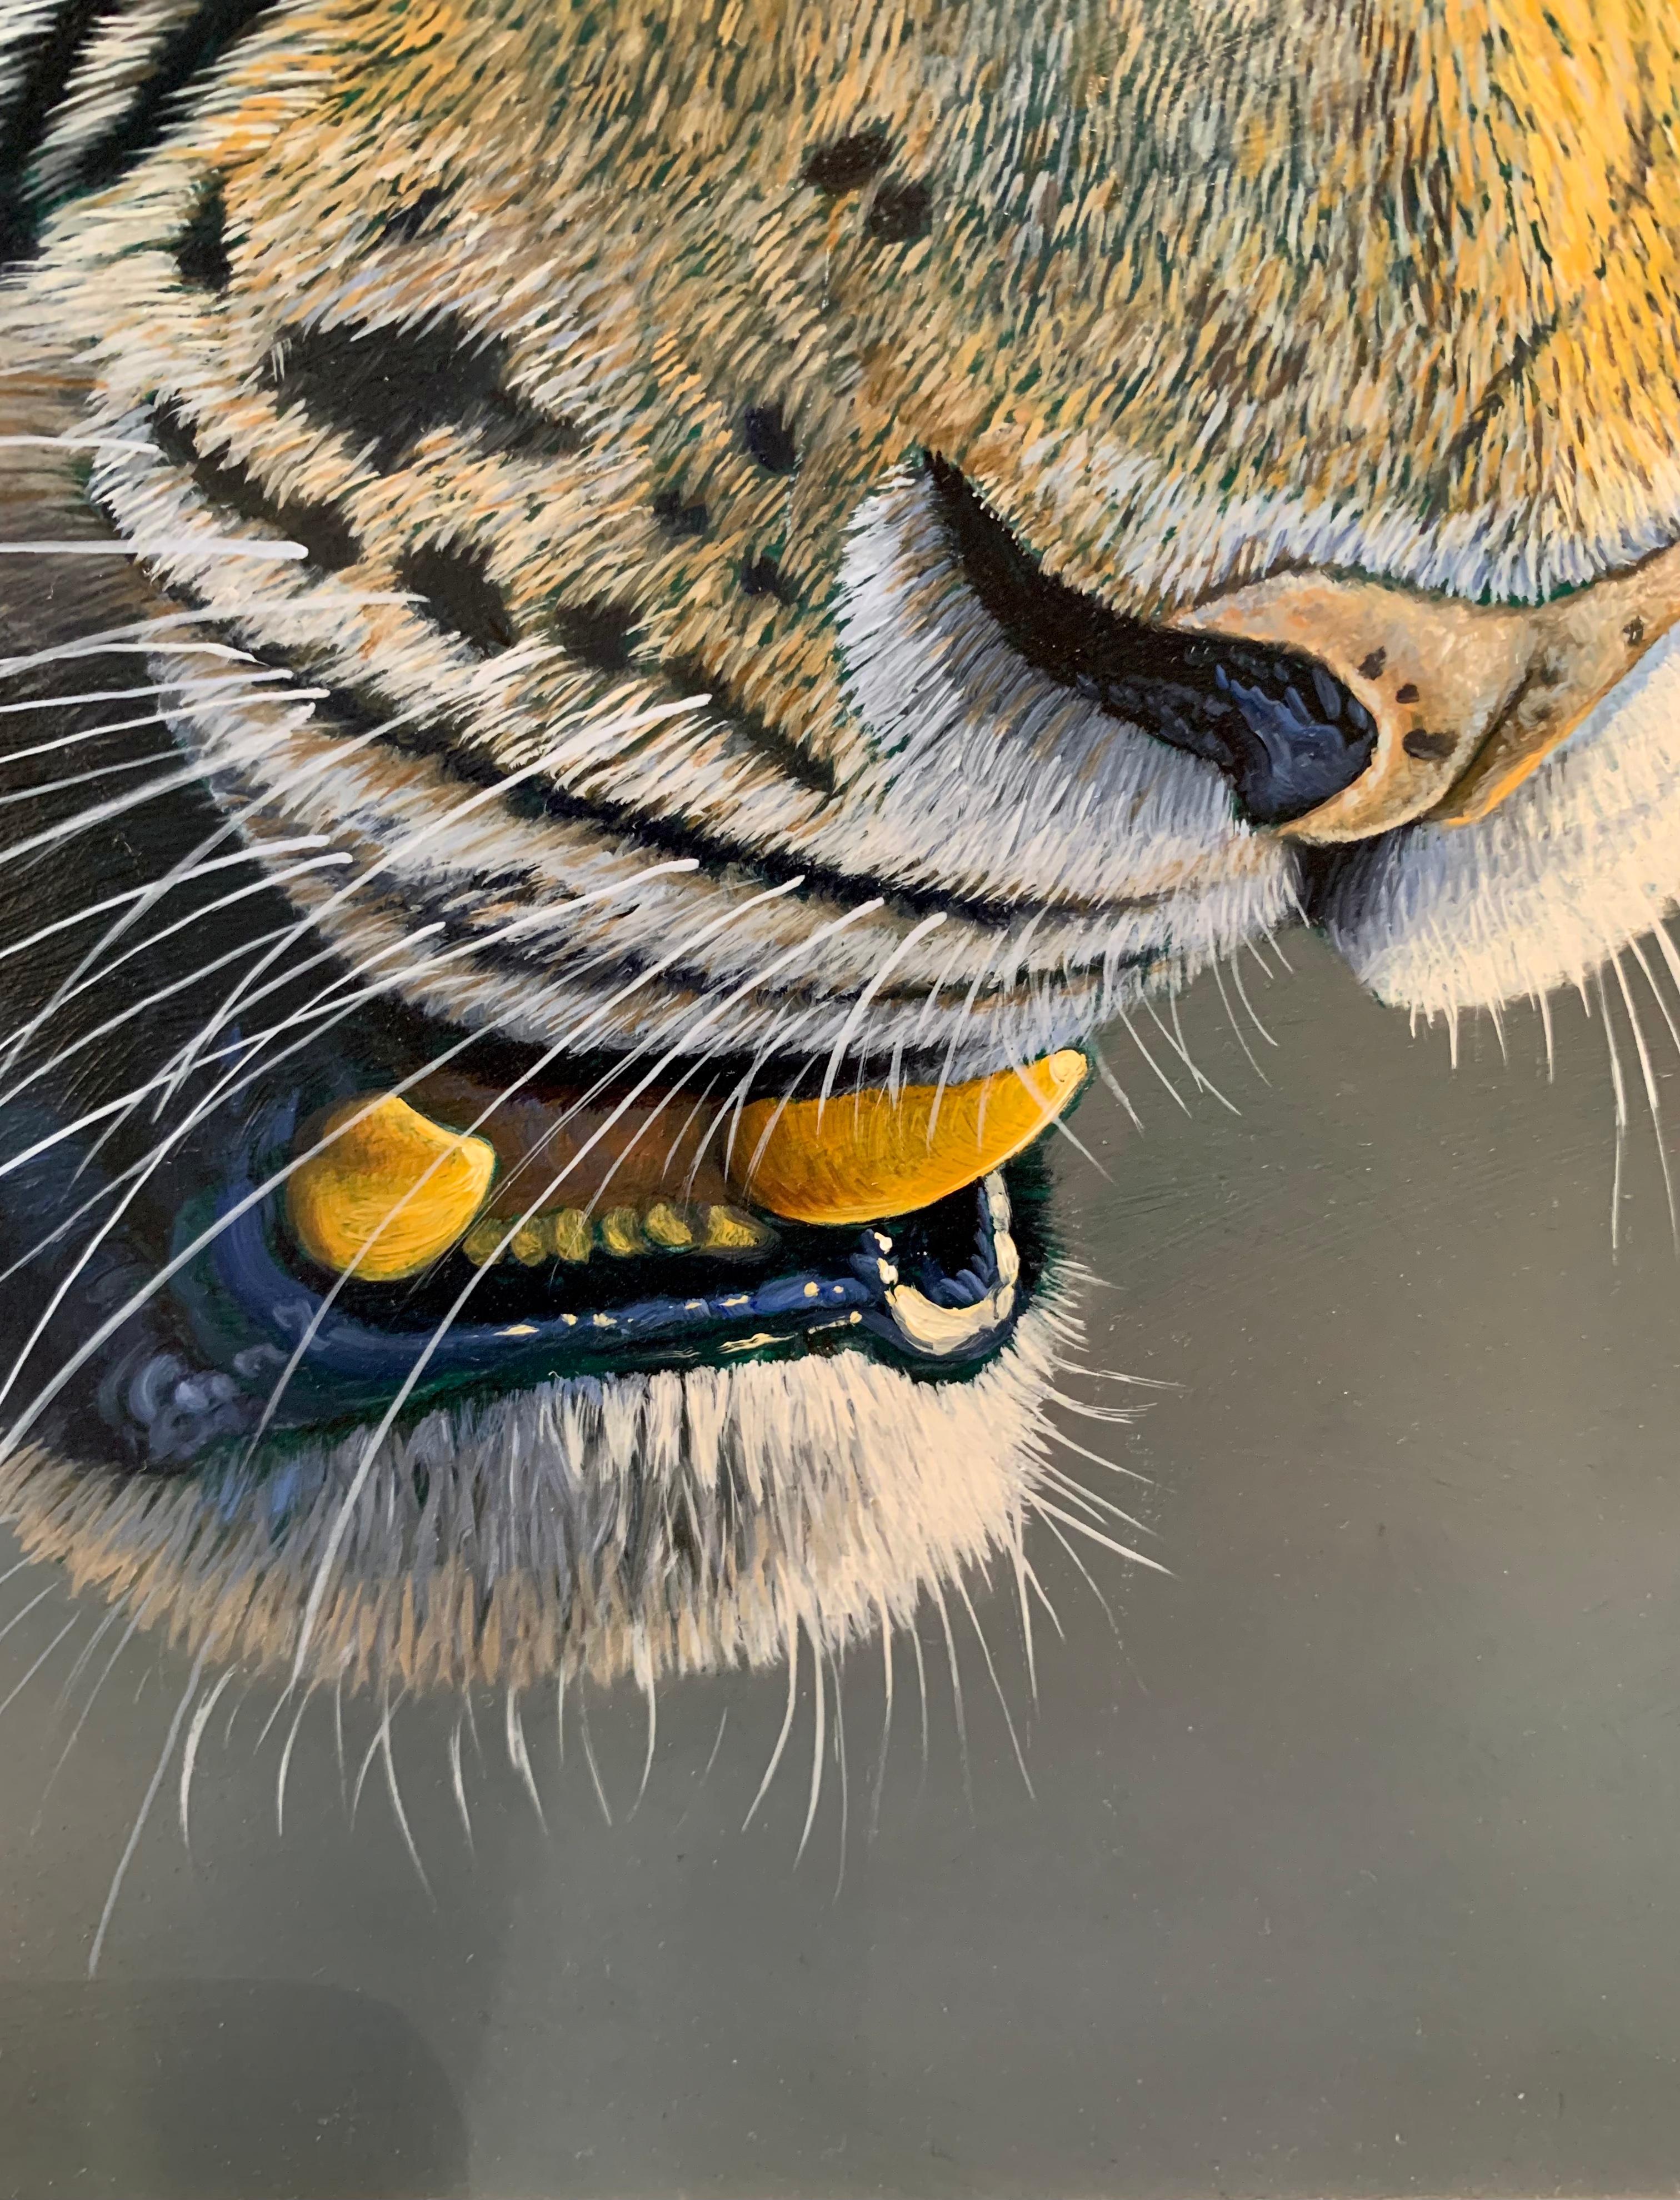 'Focus' by Ben Waddams is a Contemporary Realist Wildlife oil painting of a Tiger. With such incredible detail you can almost feel fur and hear the roar from the animals mouth. 

Ben Waddams is a British wildlife artist living and working in